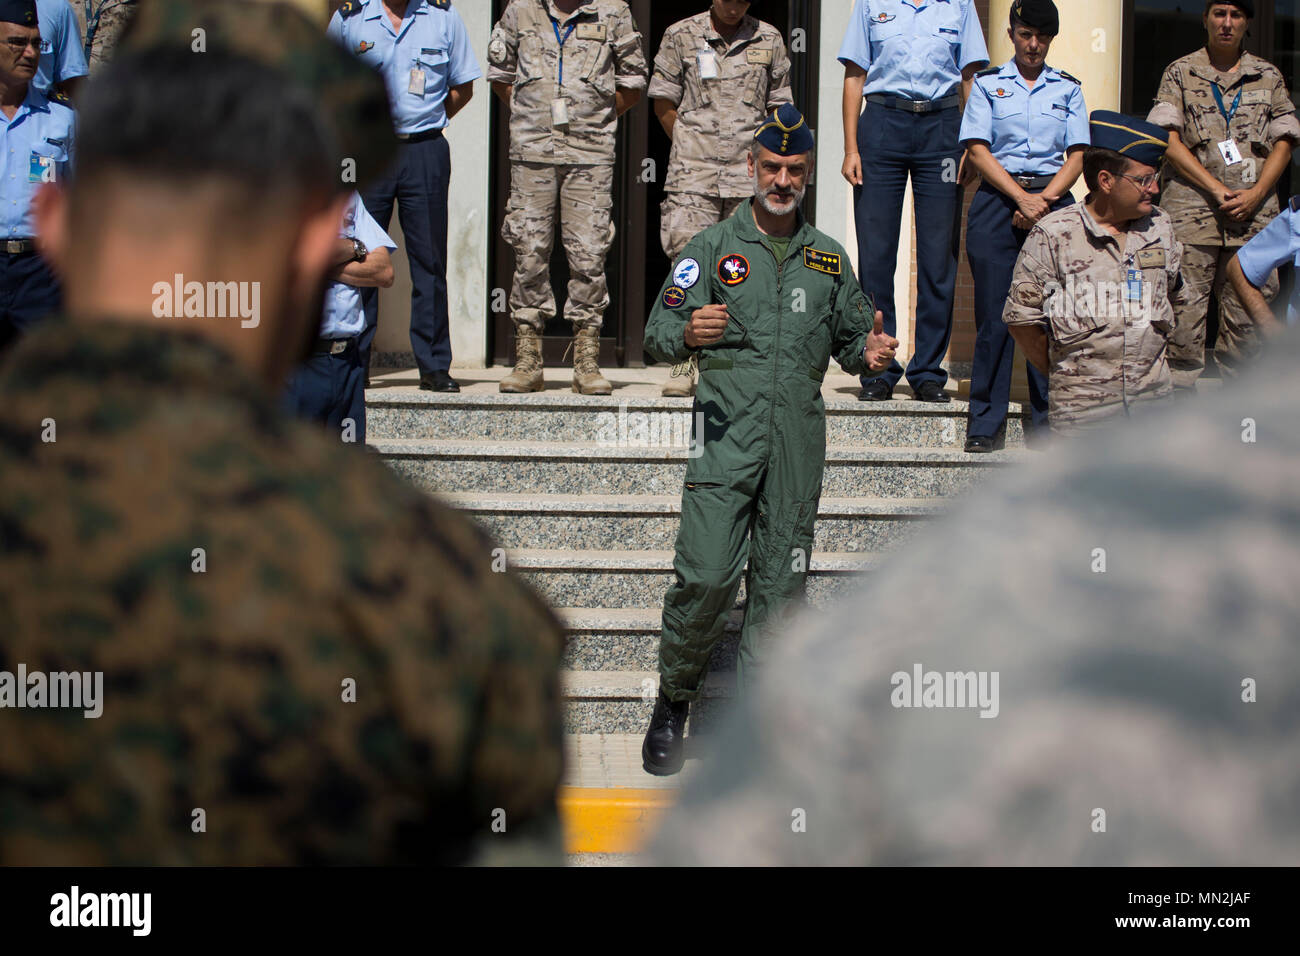 Spanish Col. Carlos Perez, the commander of Morón Air Base, speaks to members of the U.S. Marine Corps assigned to Special Purpose Marine Air-Ground Task Force-Crisis Response-Africa, U.S. Airmen with the 496th Air Base Squadron, and Spanish Air Force personnel after a moment of silence, solidarity and partnership in honor of those lost in the attack at Barcelona, Spain, at Morón Air Base, Spain, Aug 18, 2017. SPMAGTF-CR-AF deployed to conduct limited crisis response and theater security operations in Europe and North Africa. (U.S. Marine Corps Photo by Cpl. Jodson B. Graves) Stock Photo